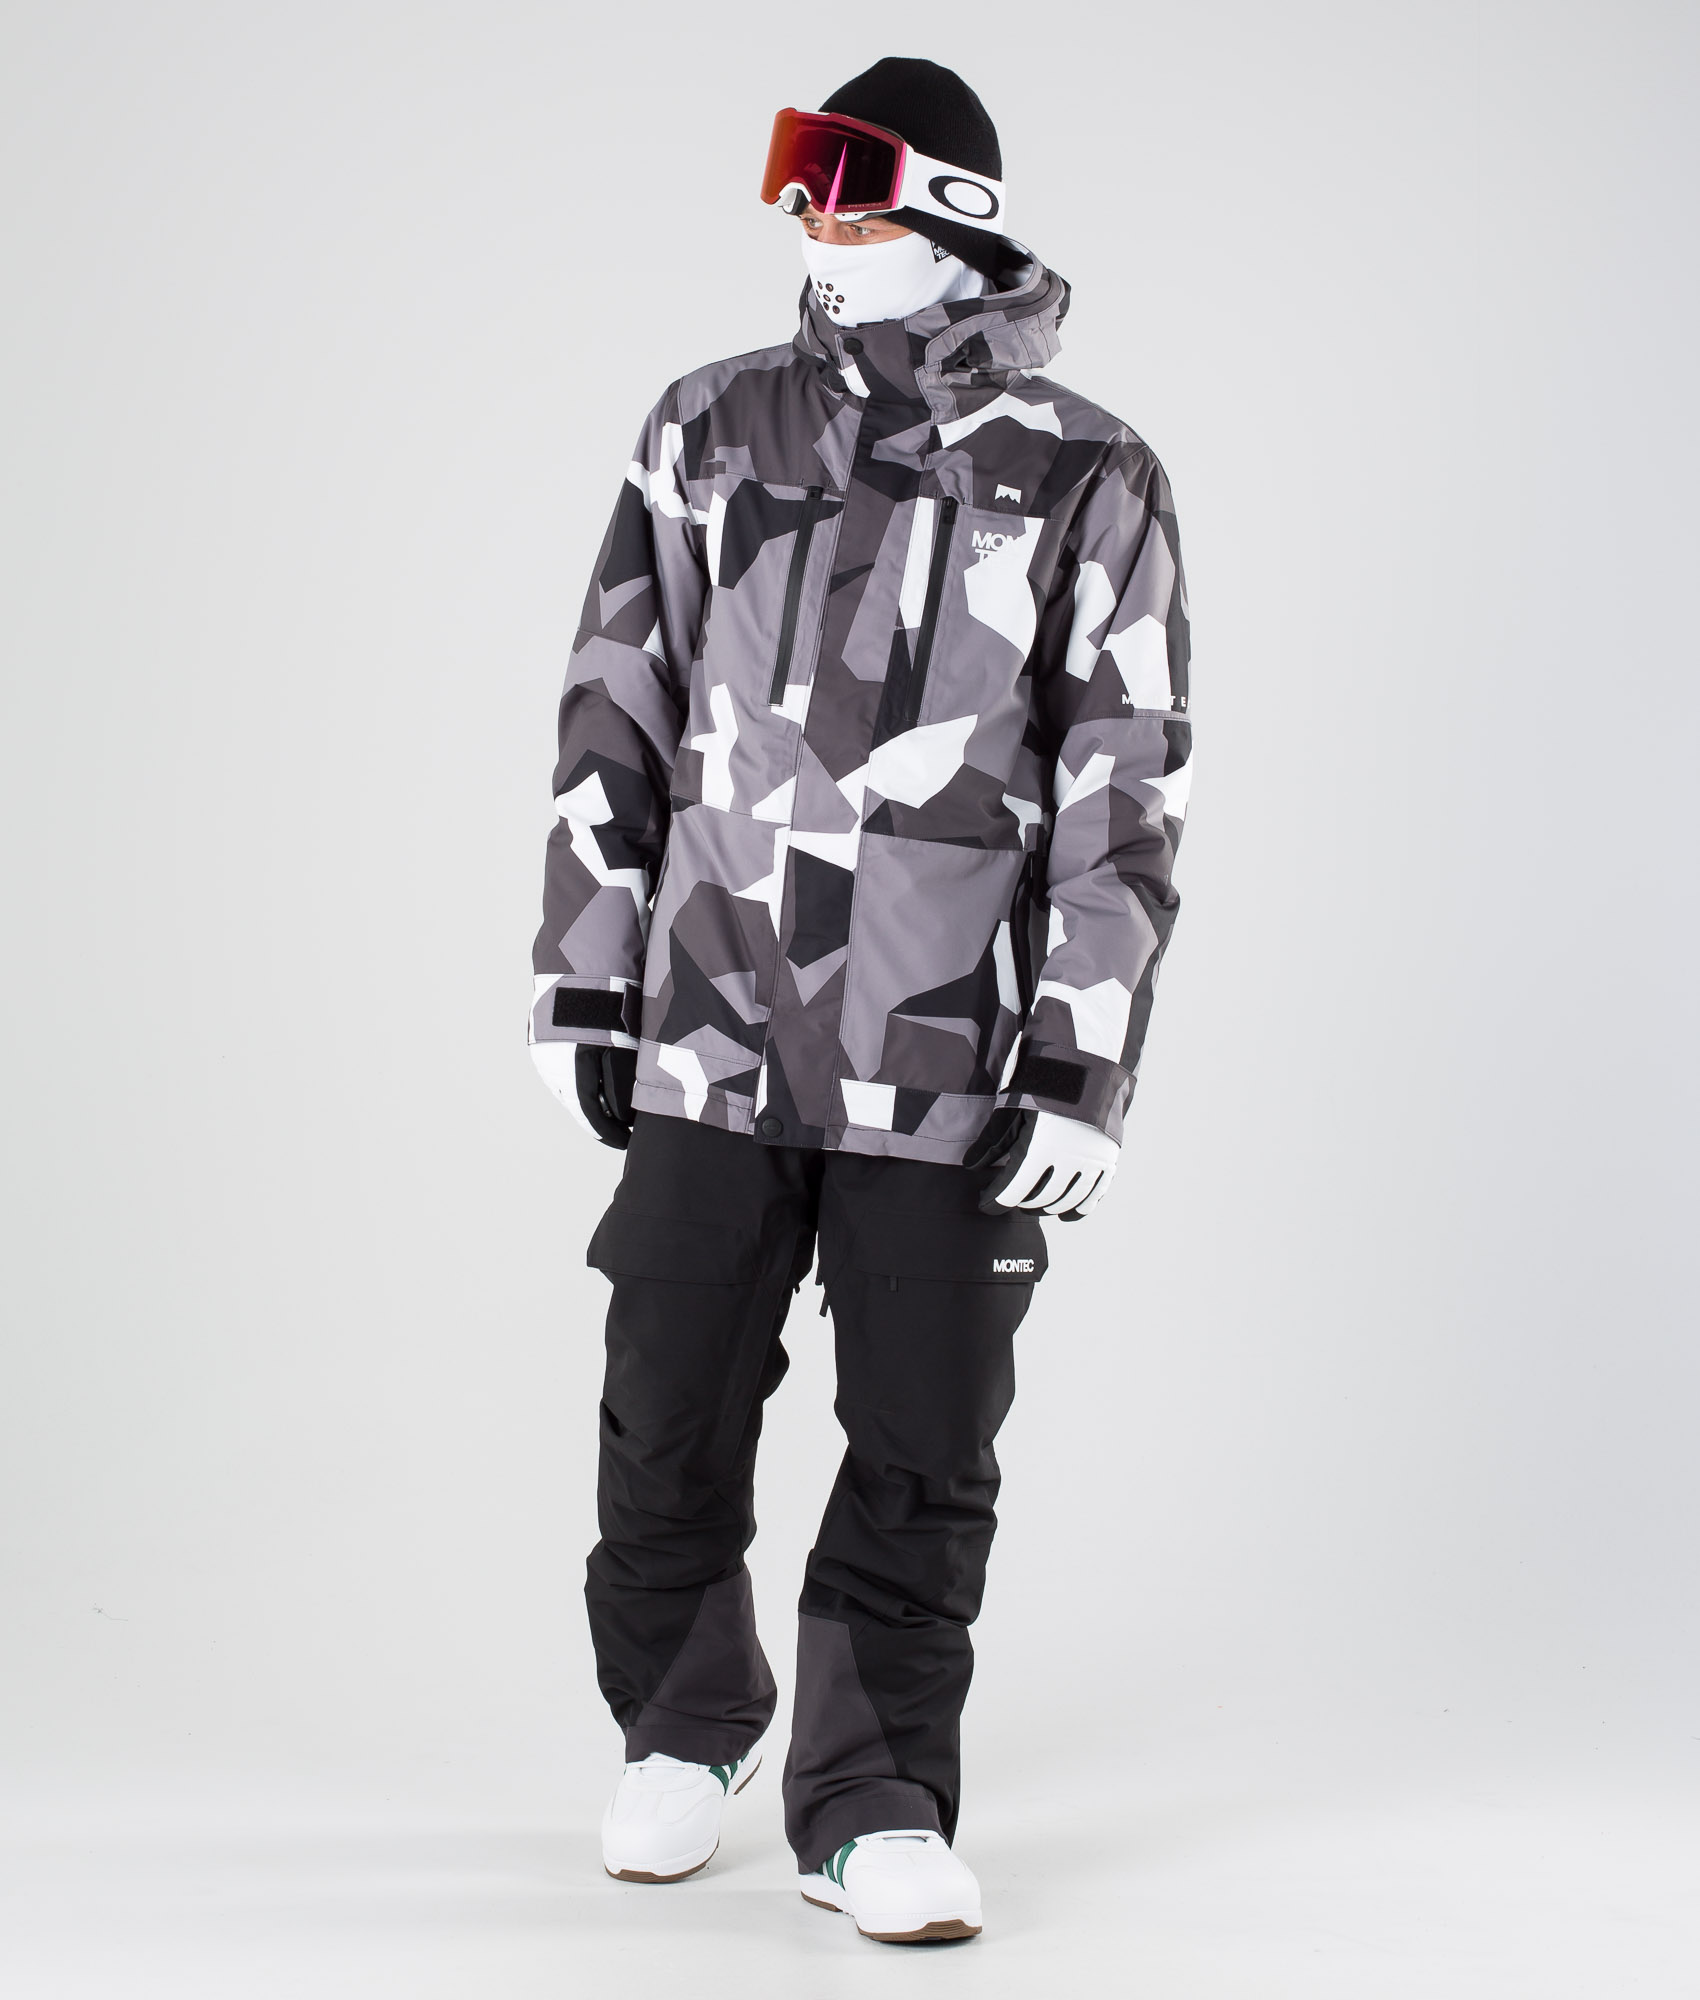 Arctic Camo Poncho cs go skin download the new for apple